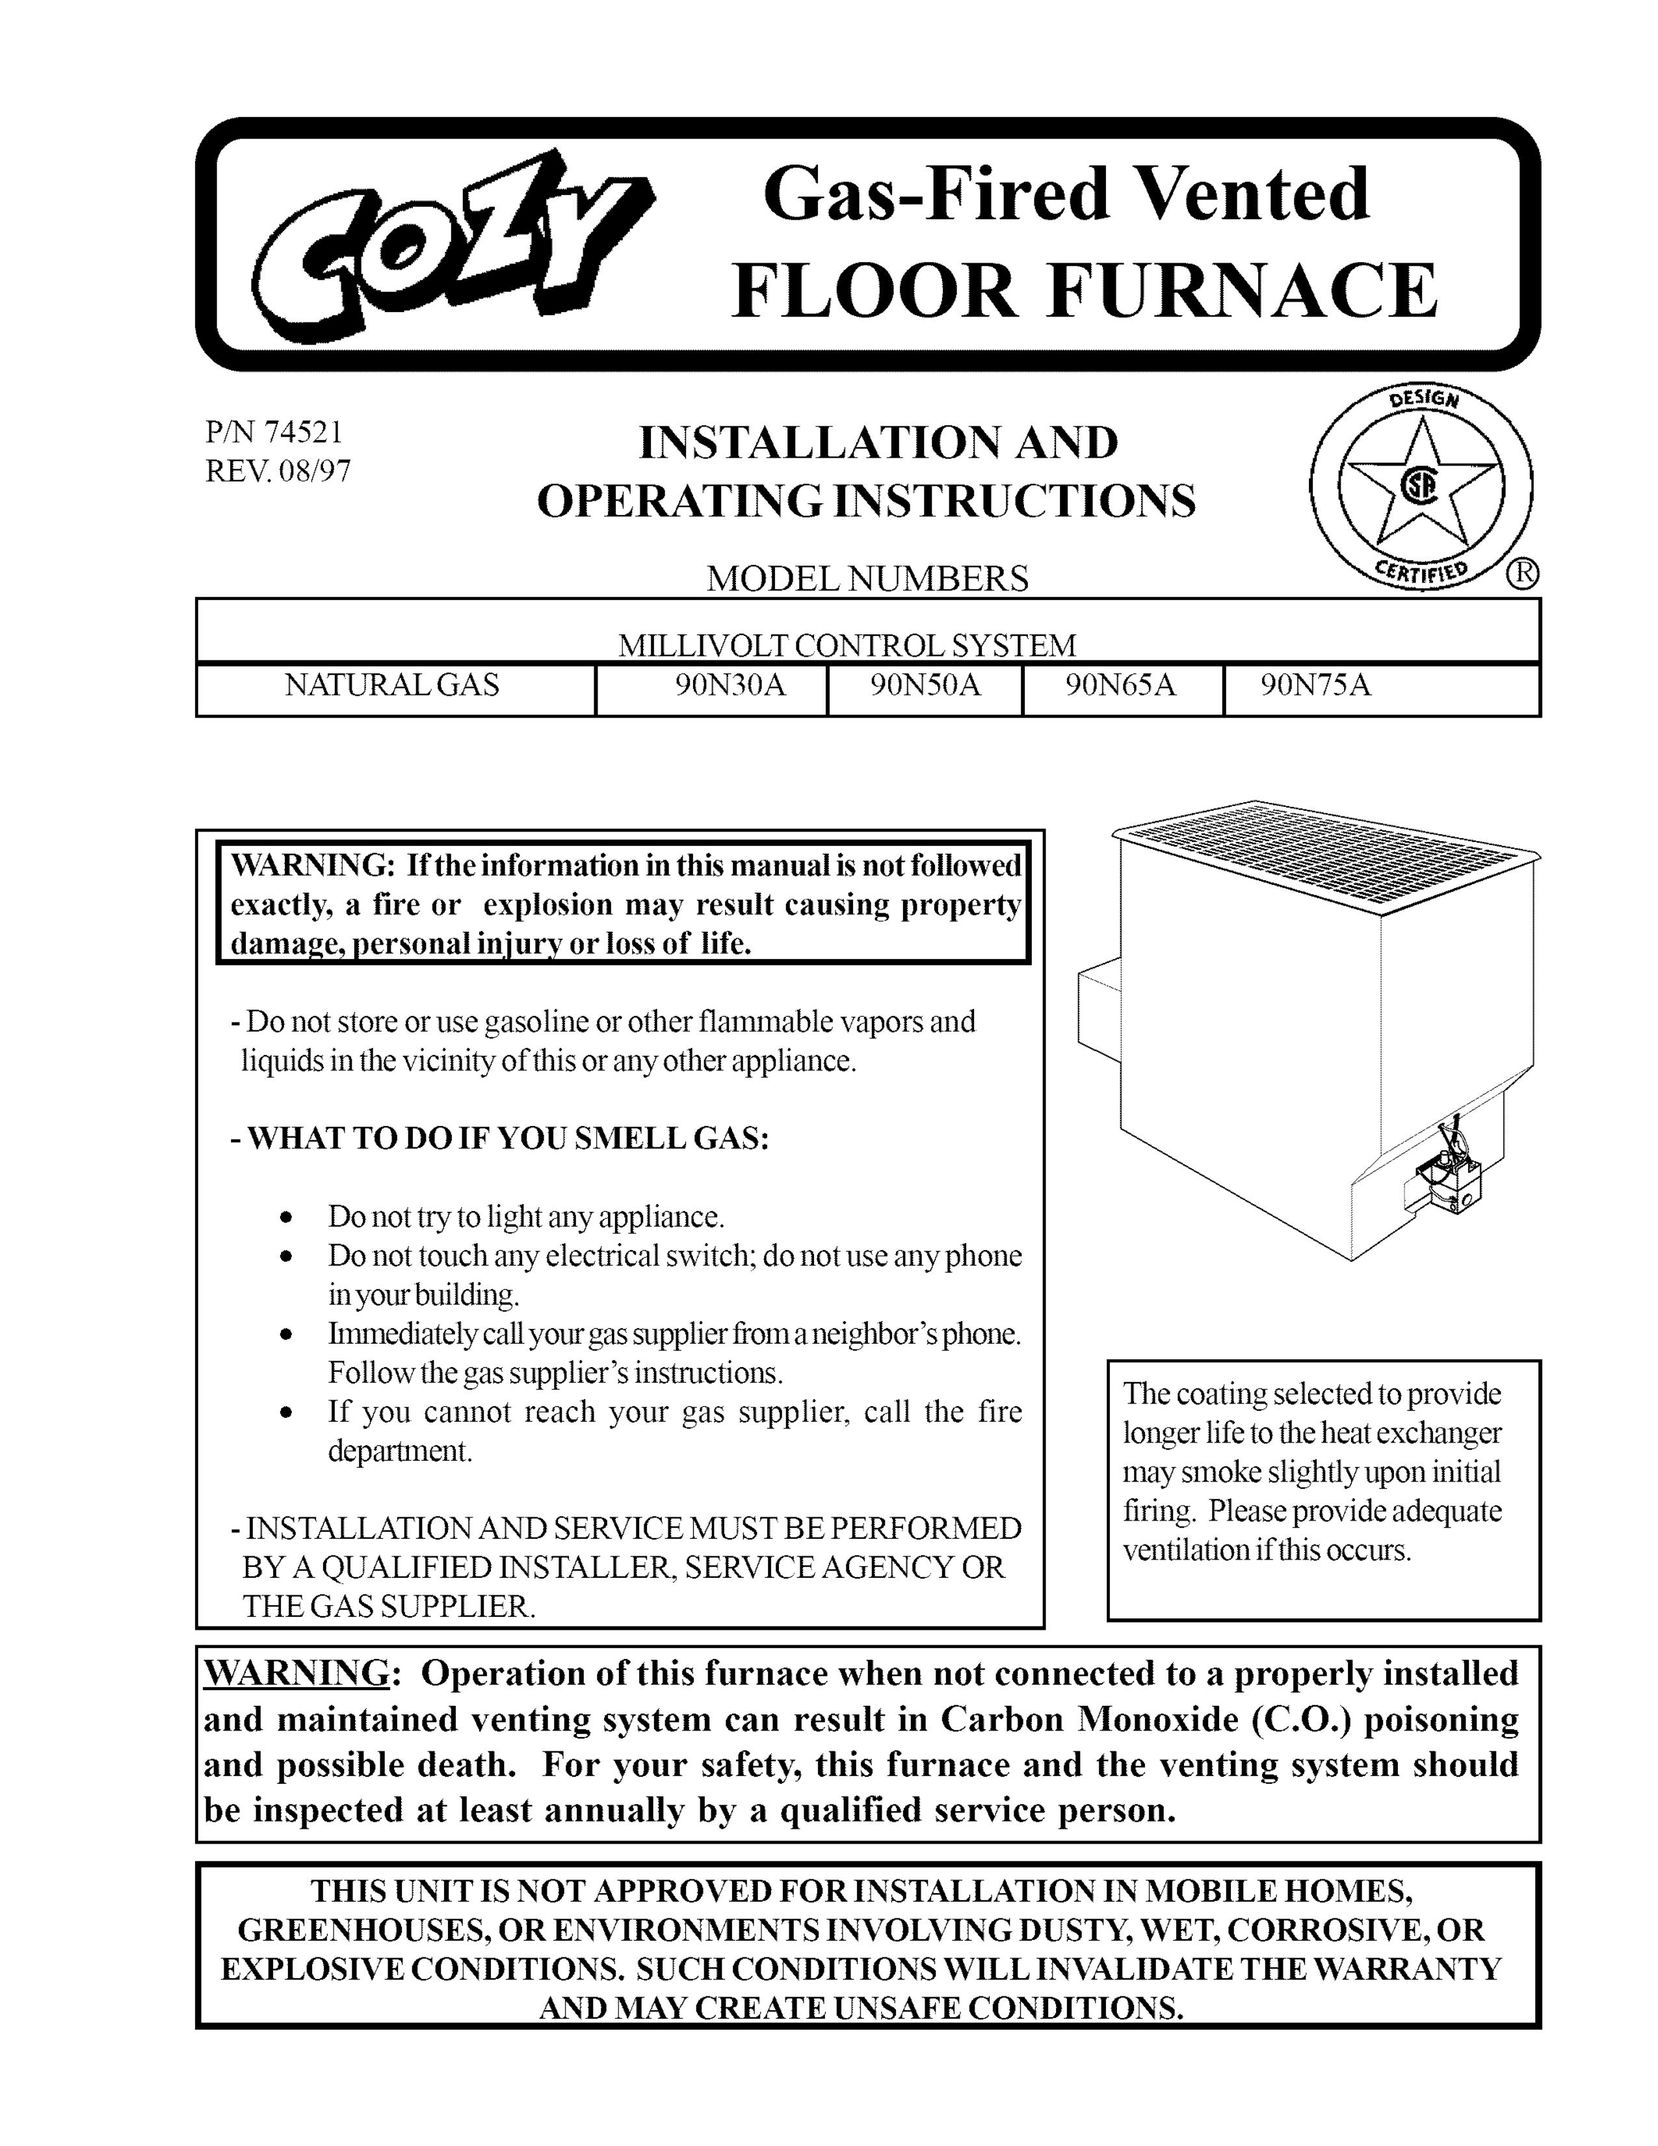 Louisville Tin and Stove 90N75A Furnace User Manual